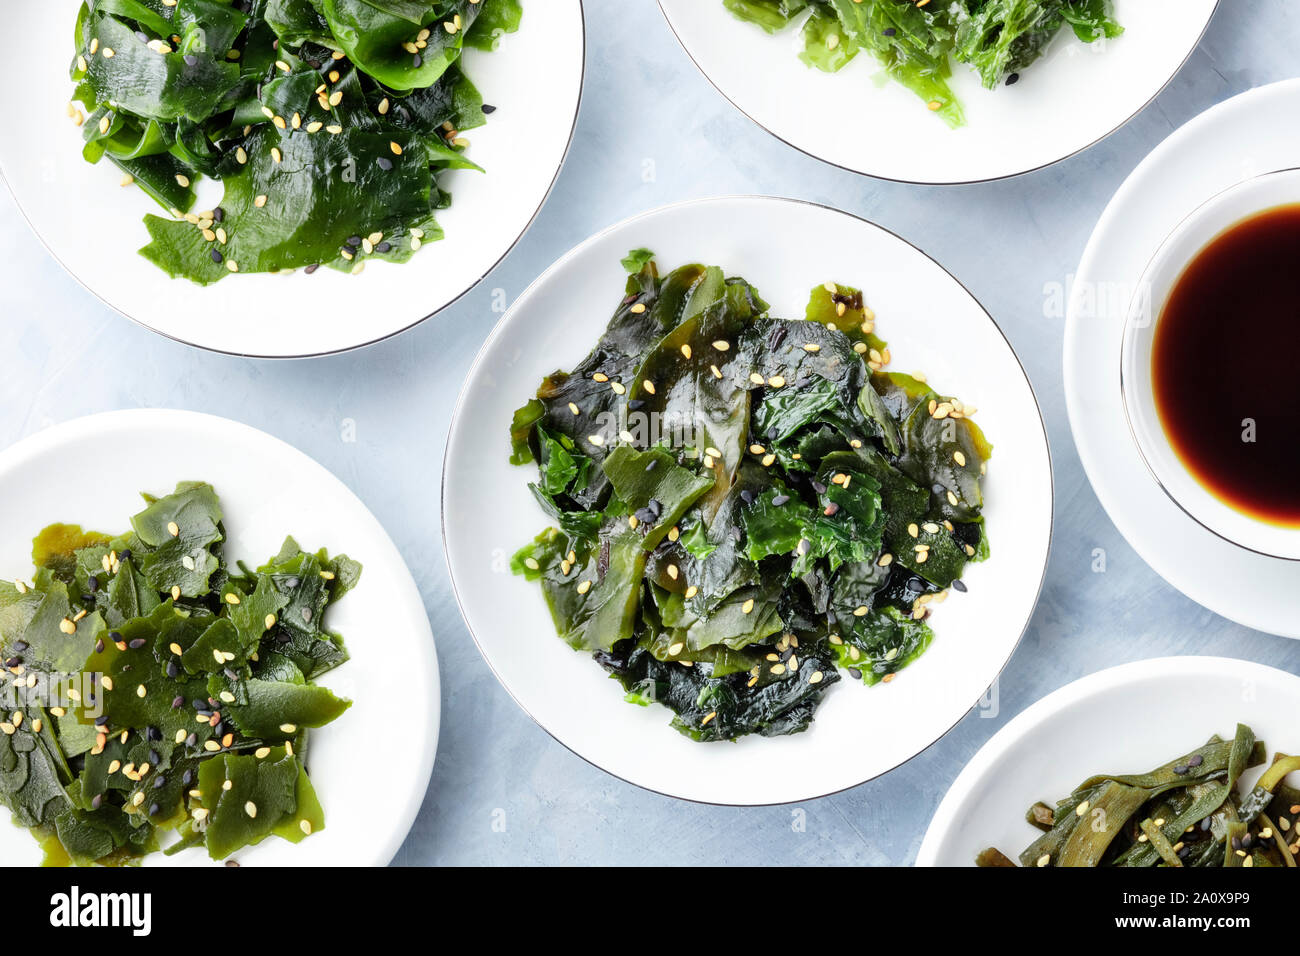 Various cooked seaweed, sea vegetables, shot from the top with a sauce and sesame seeds Stock Photo